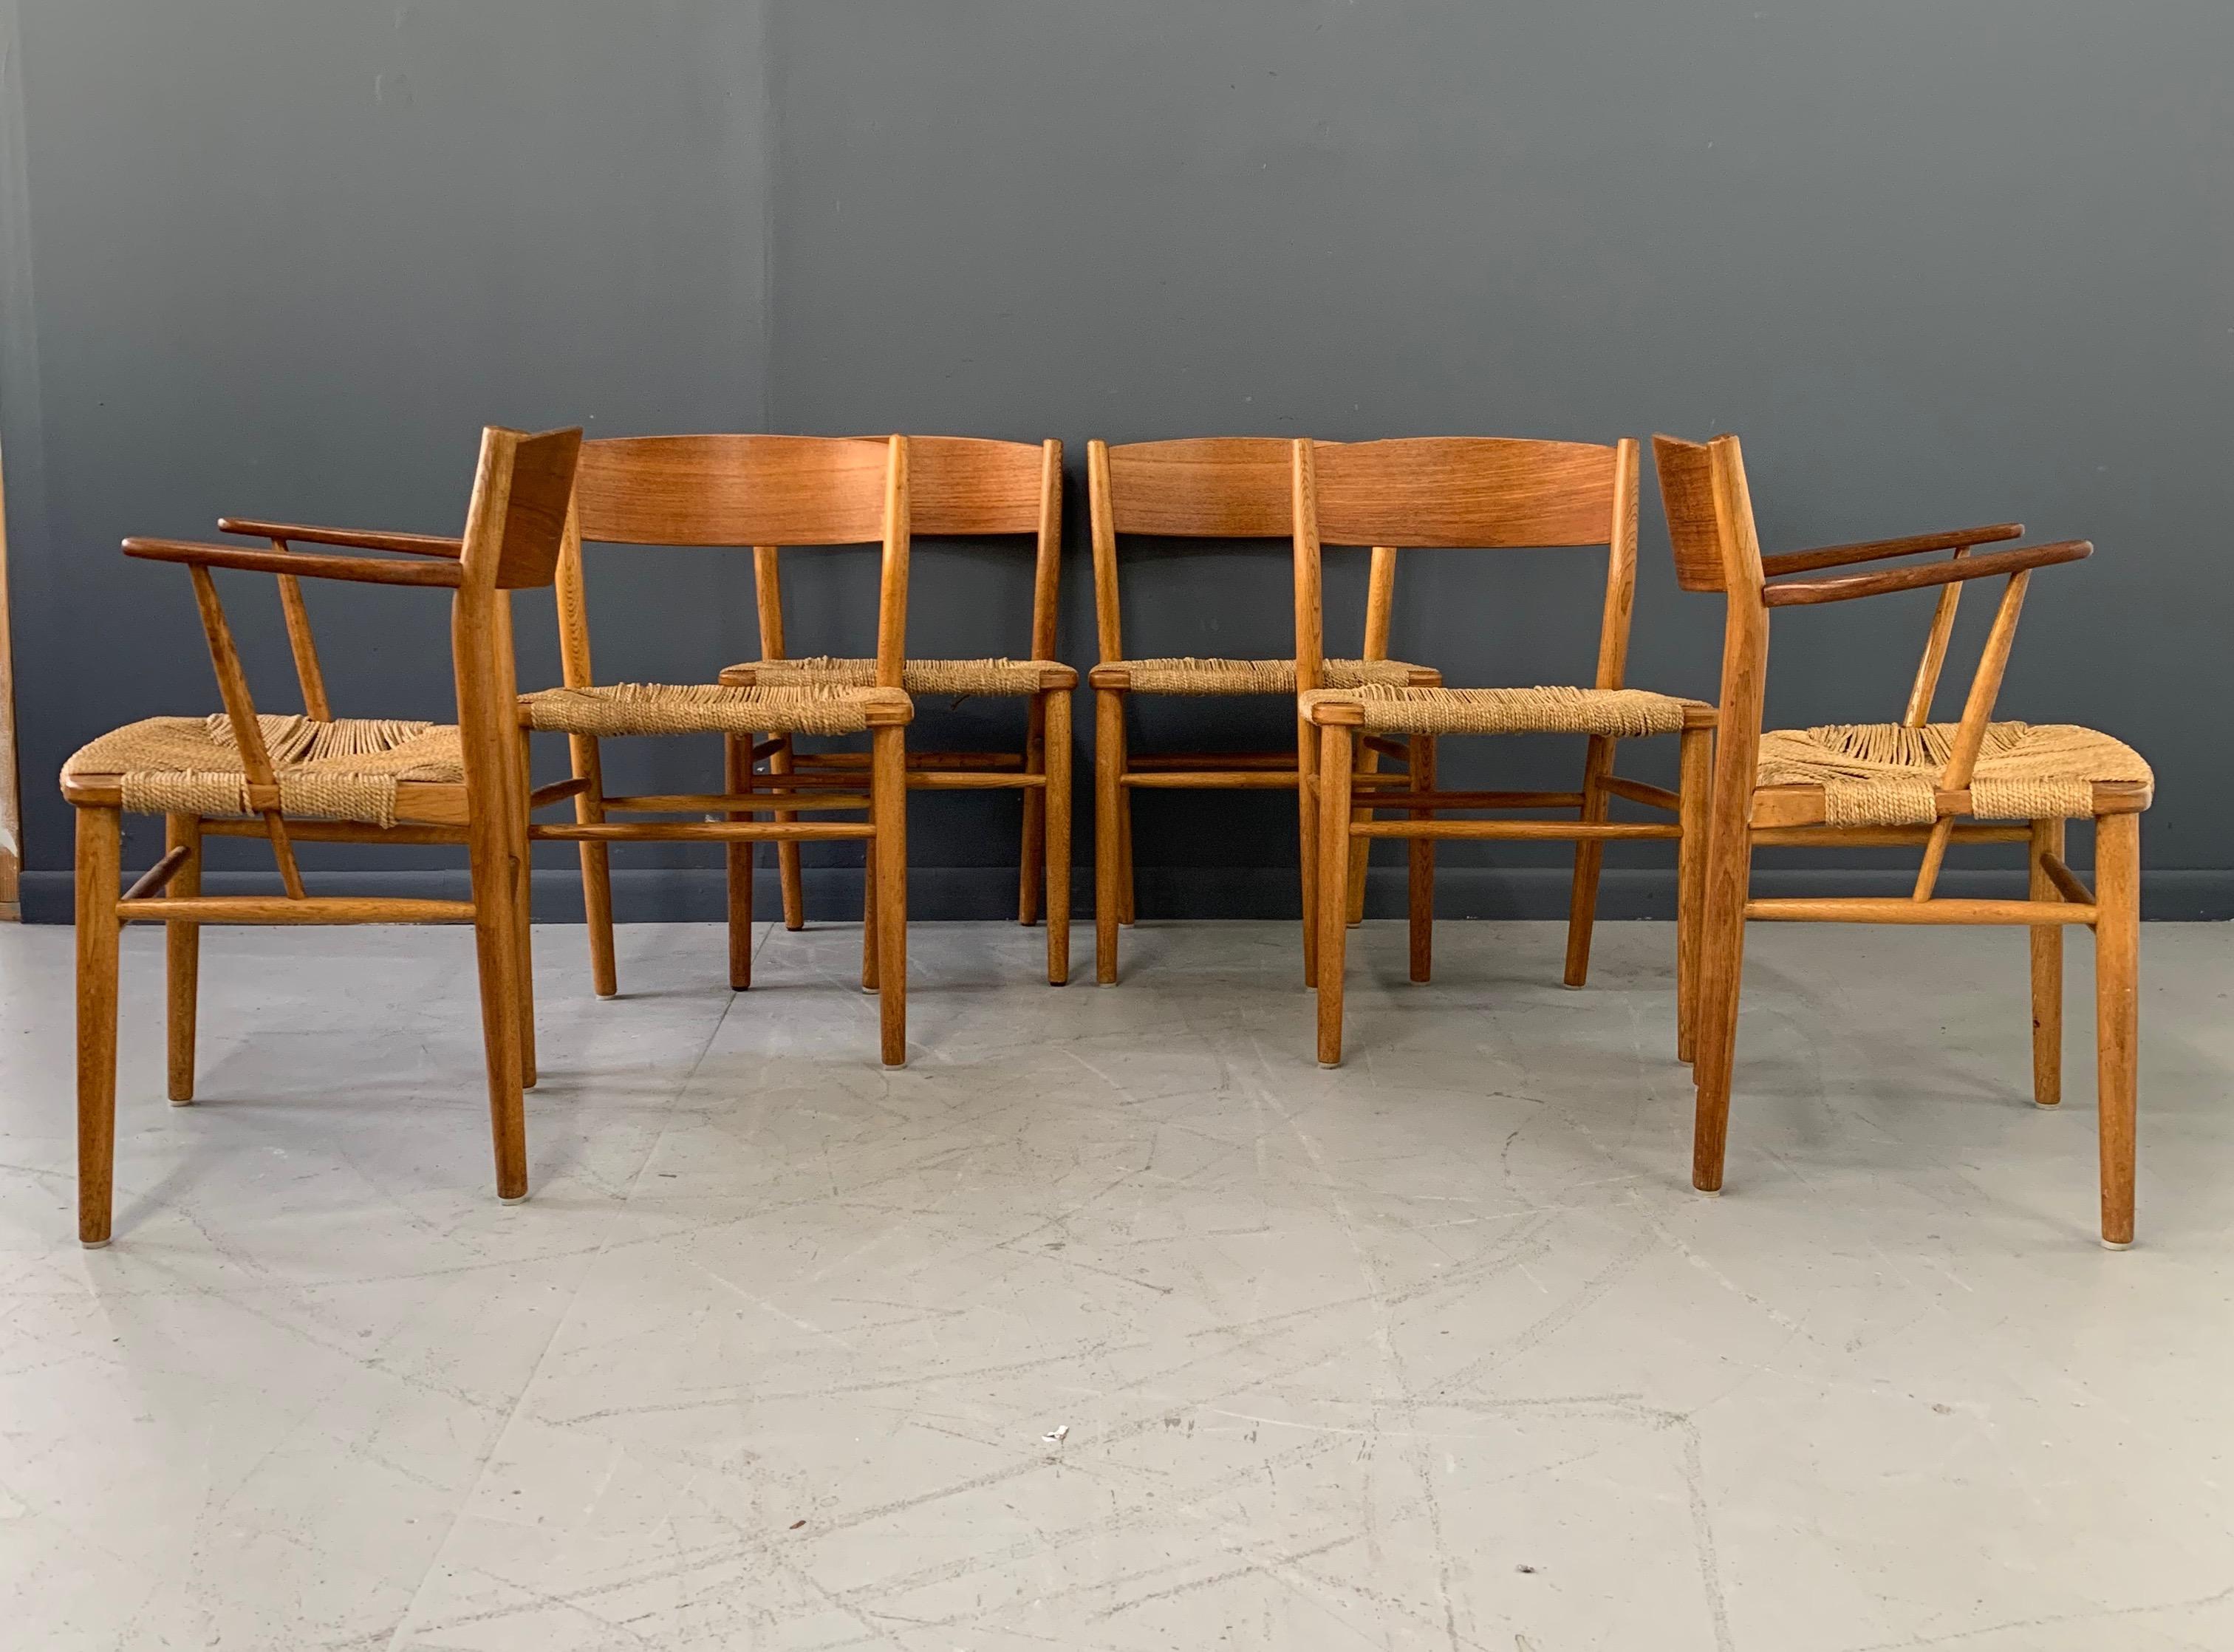 Beautiful set of six dining chairs in oak and seagrass by Børge Mogensen.